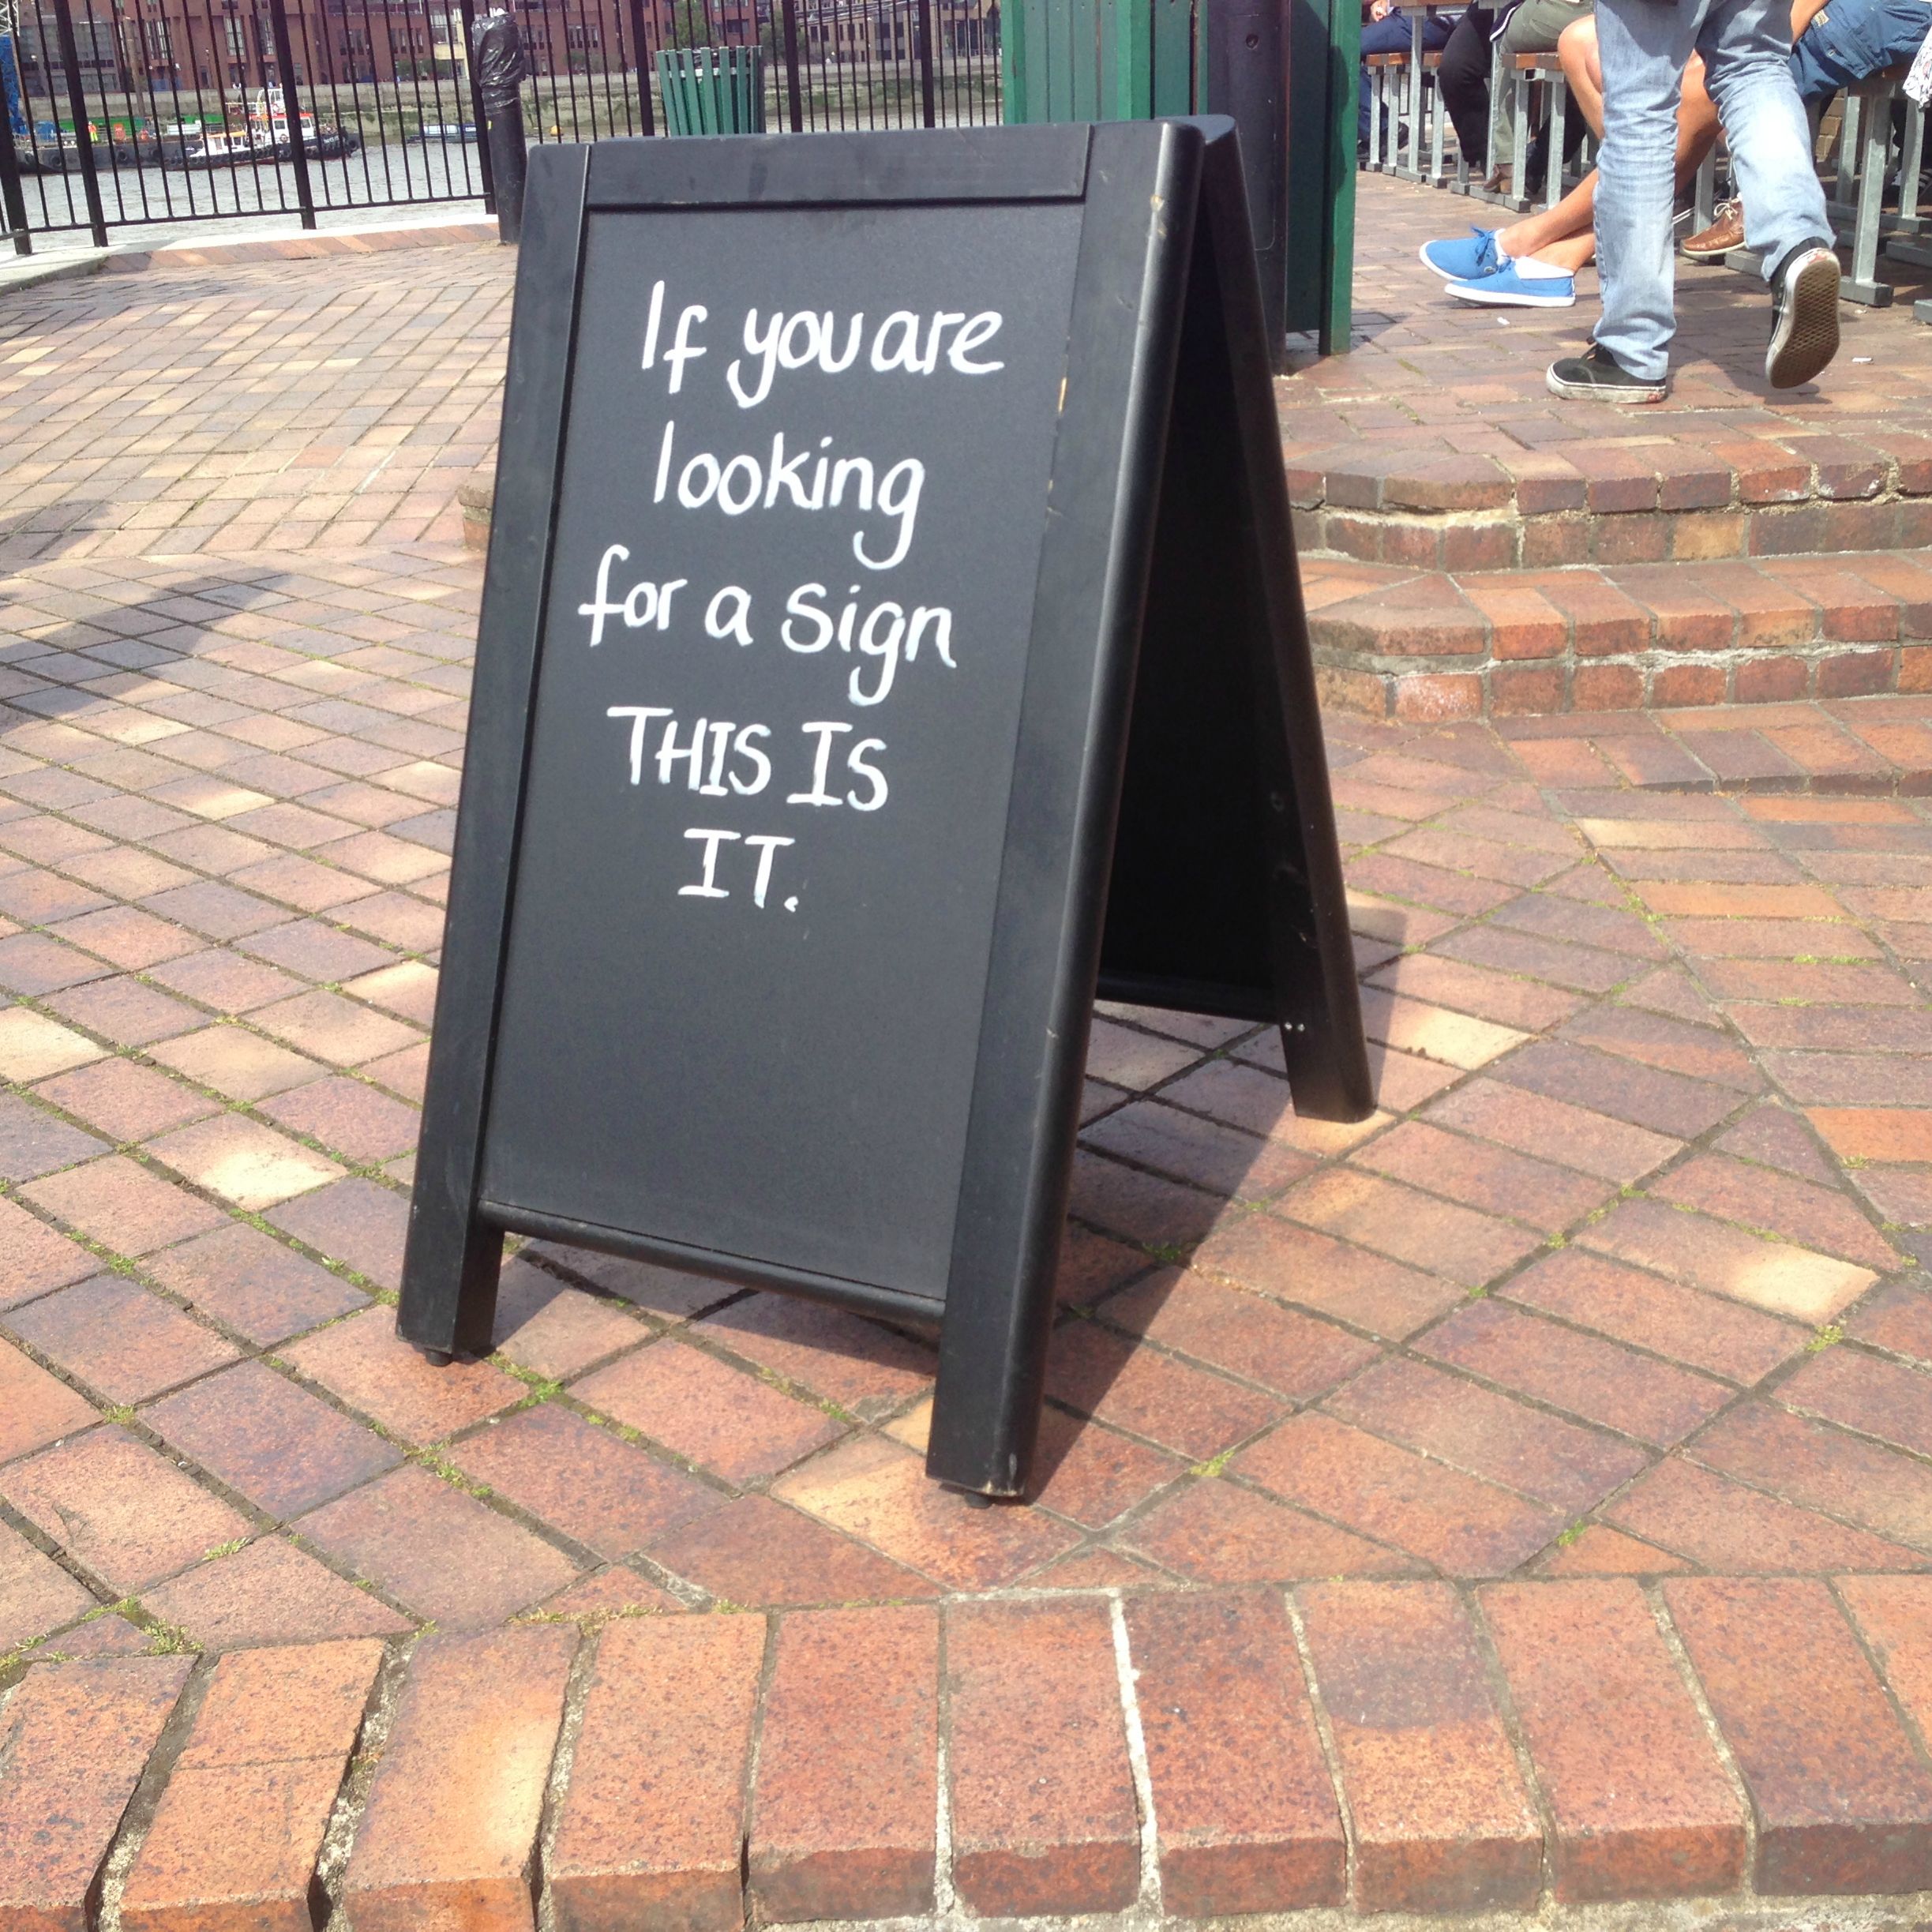 random pic if you re looking for a sign - If you are looking for a sign This Is It.